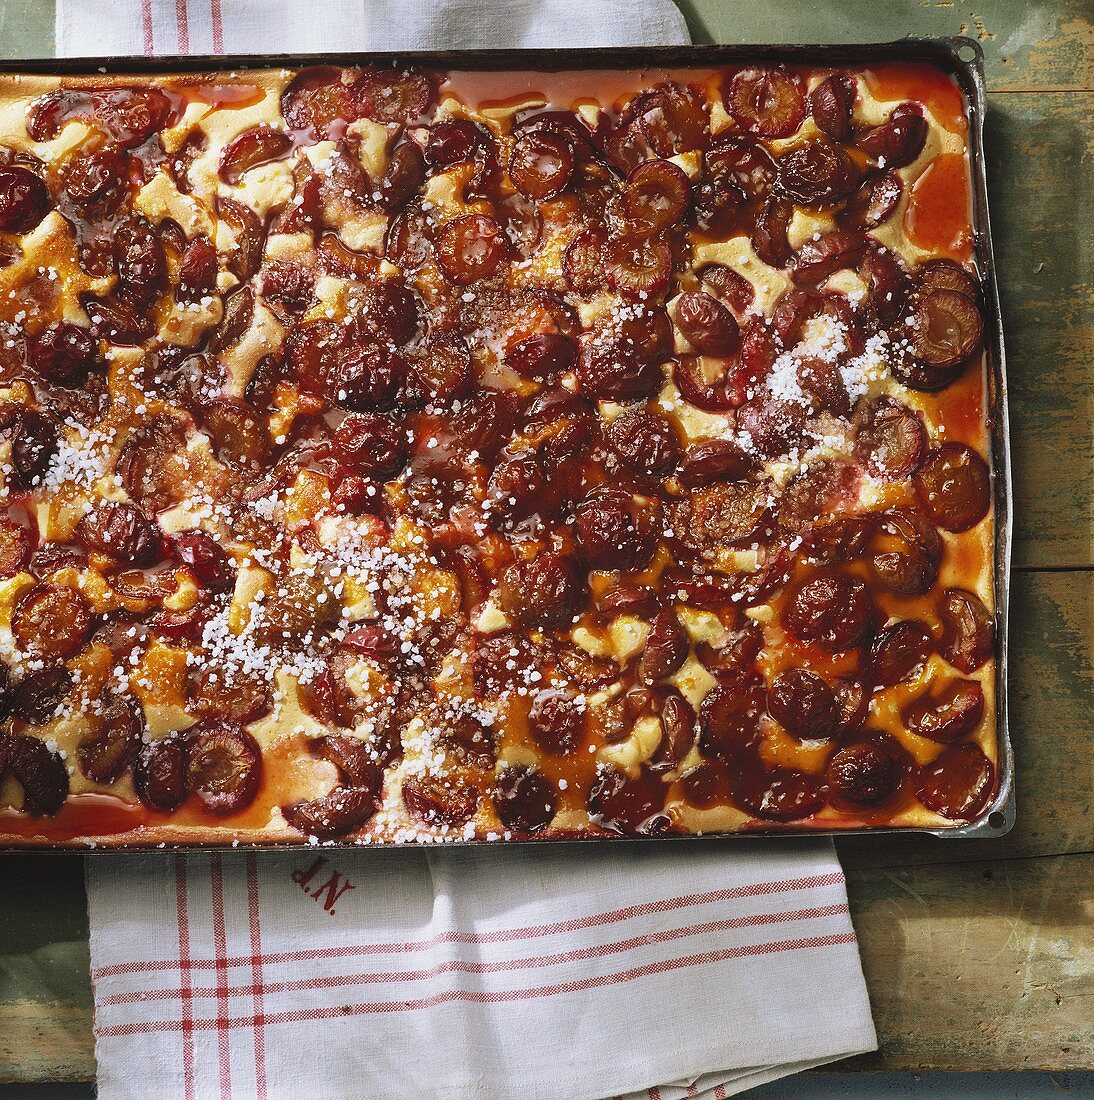 Plum cake with caramel icing on a baking tray